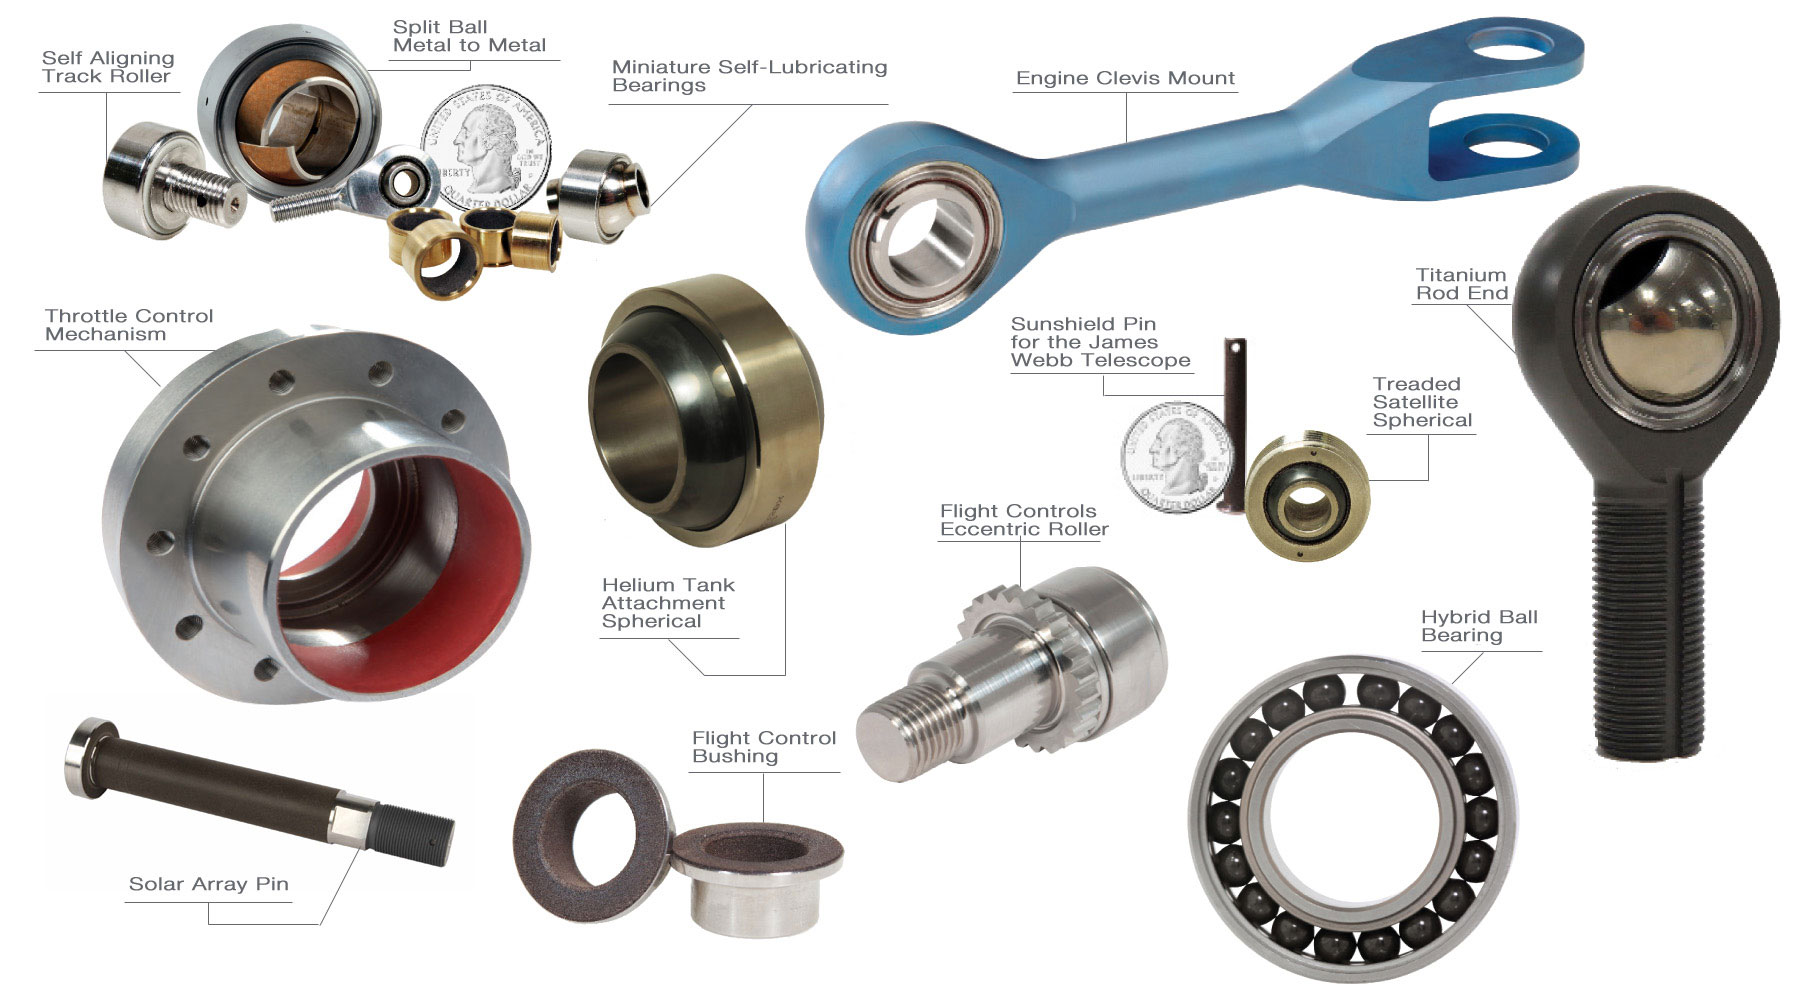 Kamatics Specialty Bearings for Space